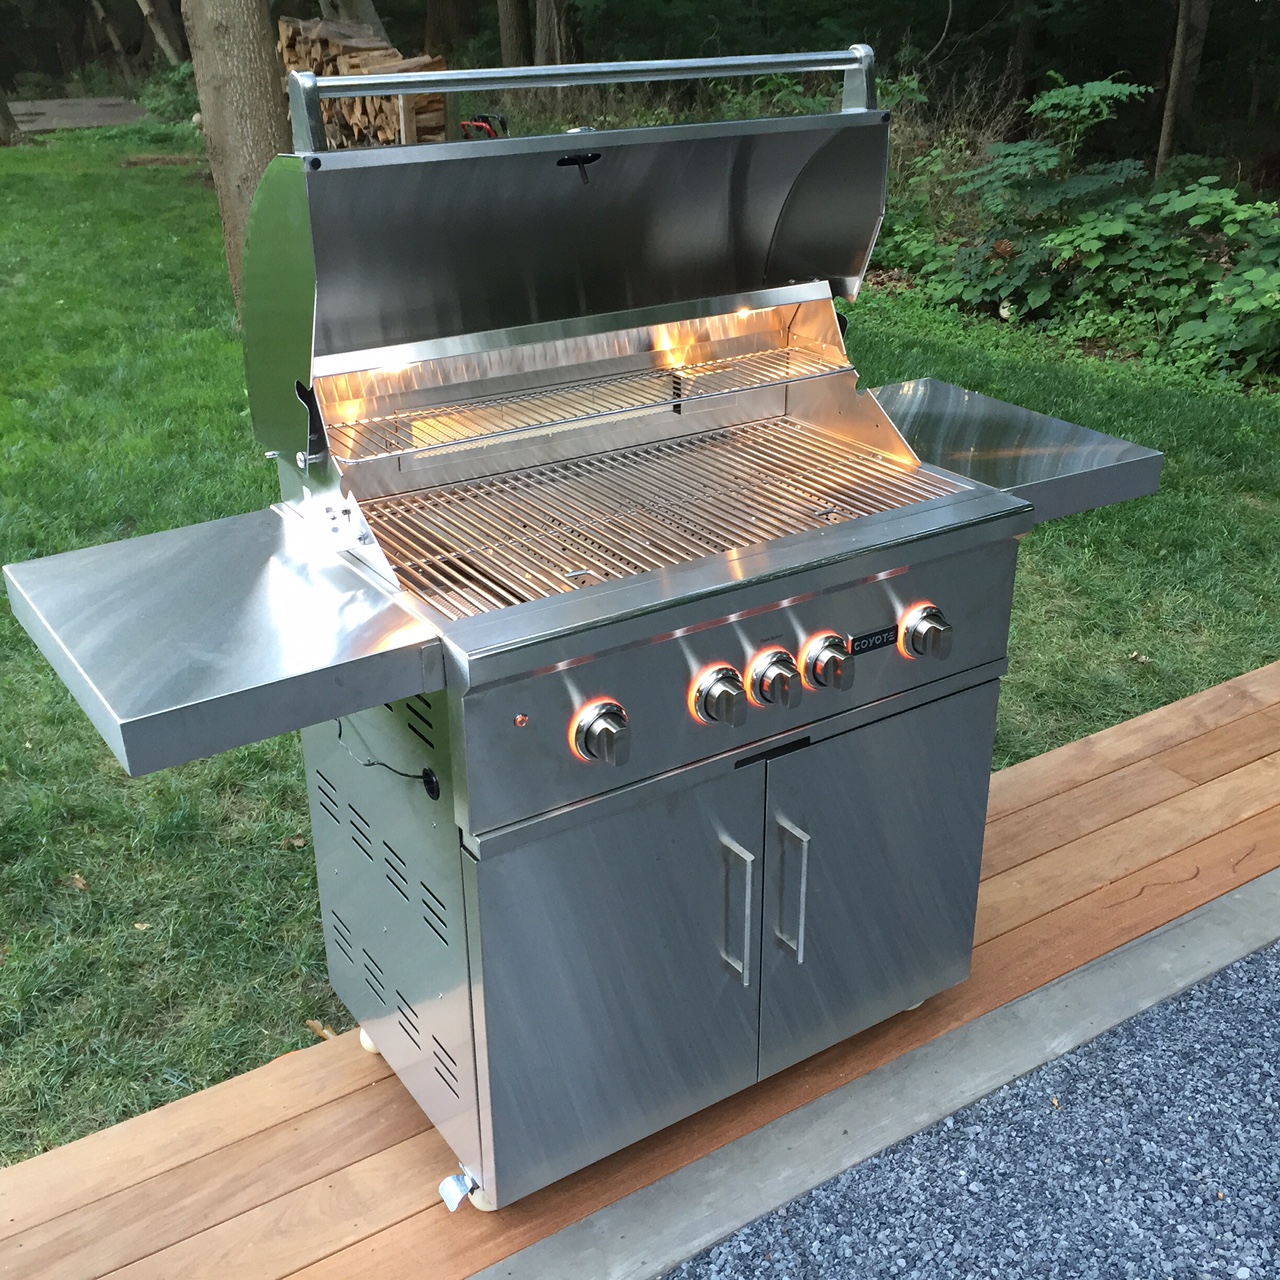 Unboxing Coyote Grill for Outdoor Kitchen - Jon Peters Art & Home